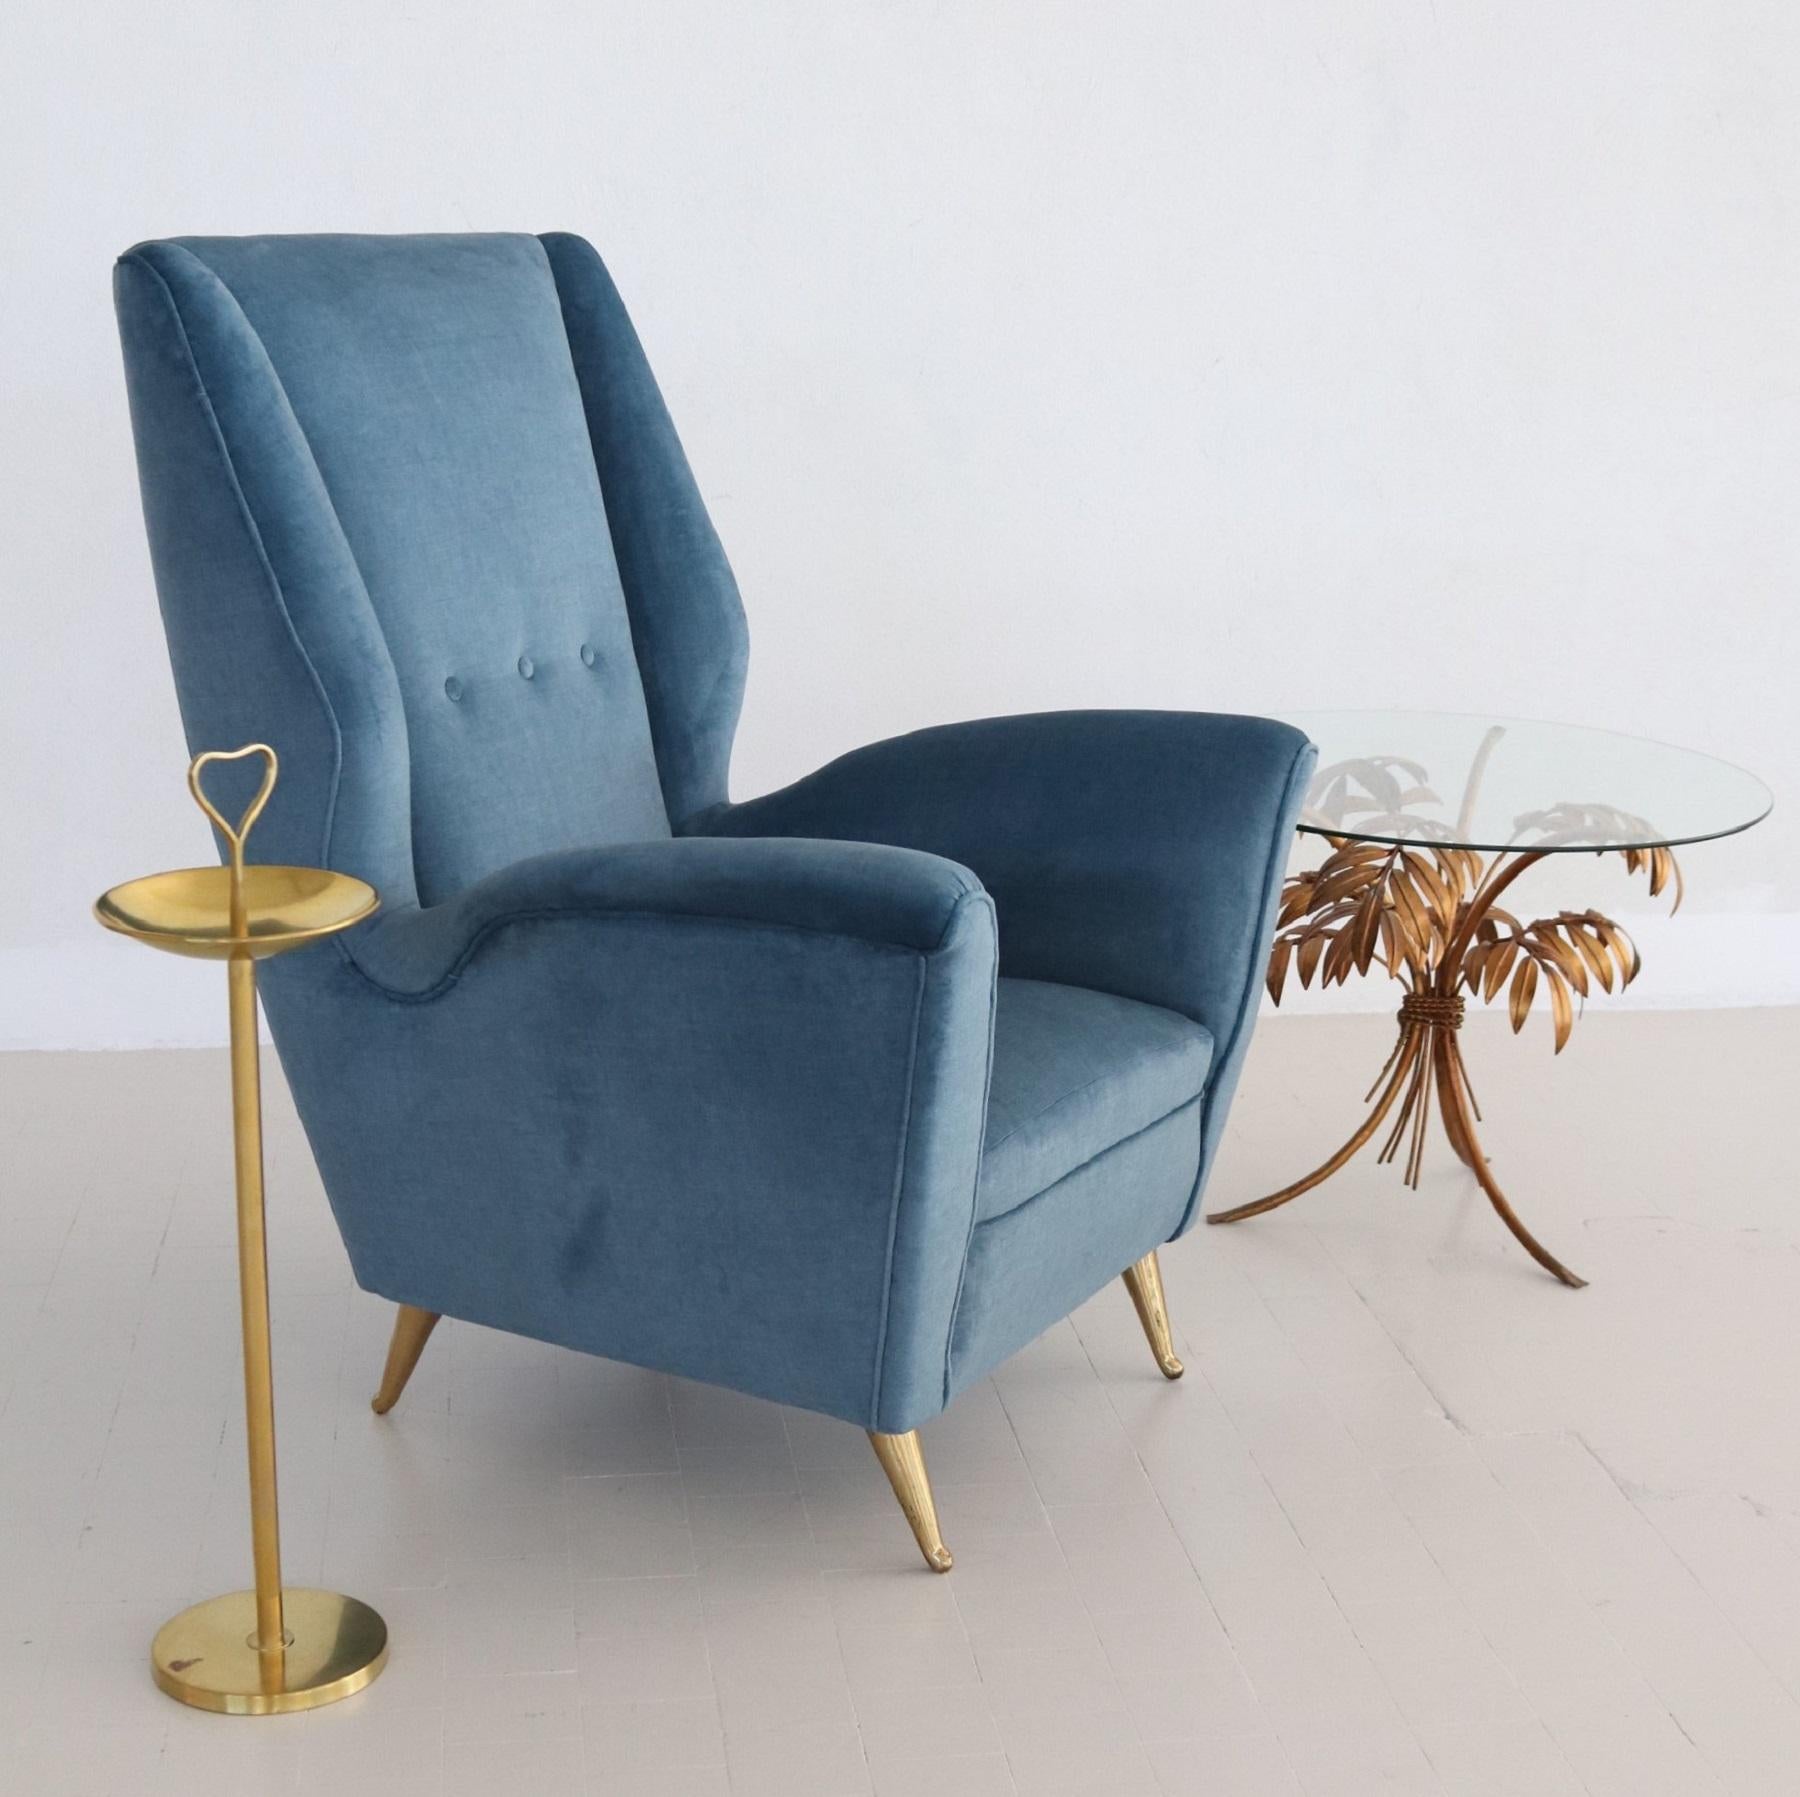 Magnificent, beautiful Italian original midcentury armchair or lounge chair from the 1950s with full brass feet.
Made In Italy by ISA in the 1950s.
Completely restored internally with quality material and outside reupholstered with soft blue